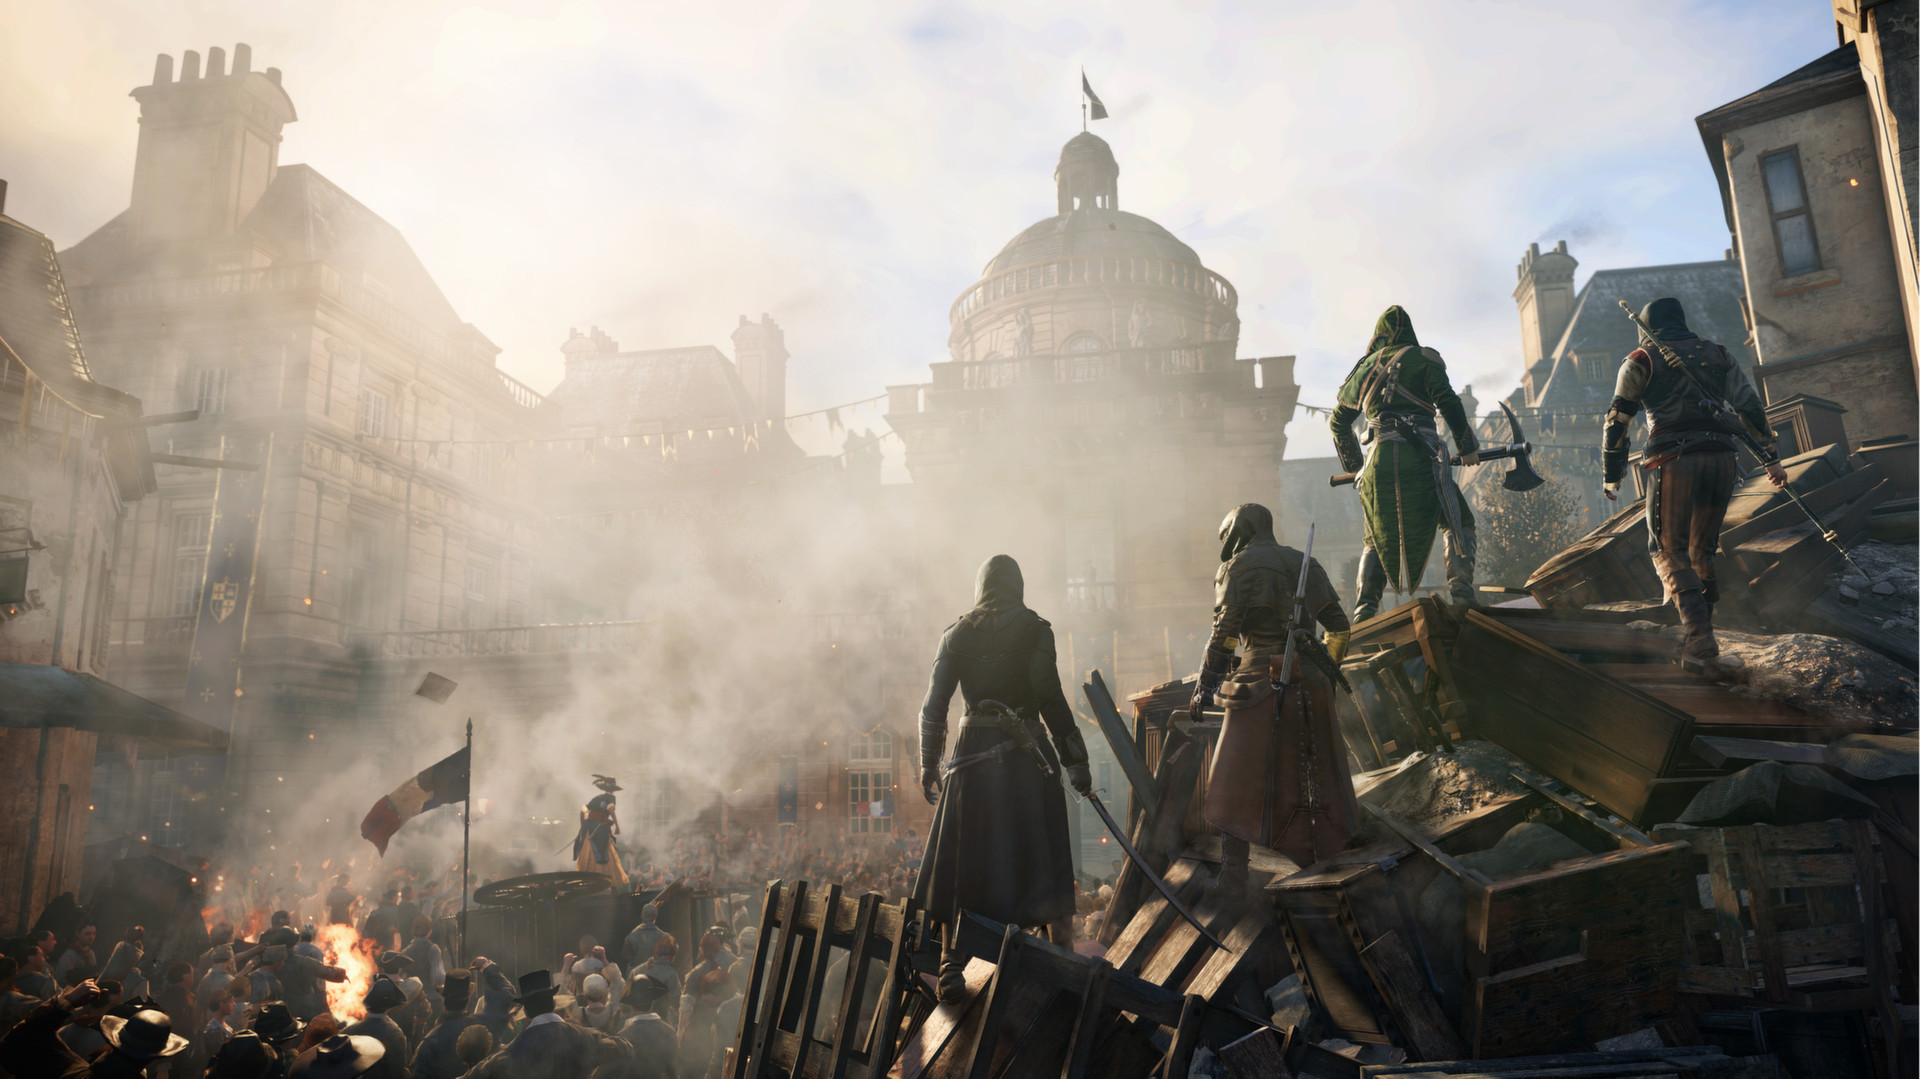 Save 85% on Assassin's Creed® Unity on Steam